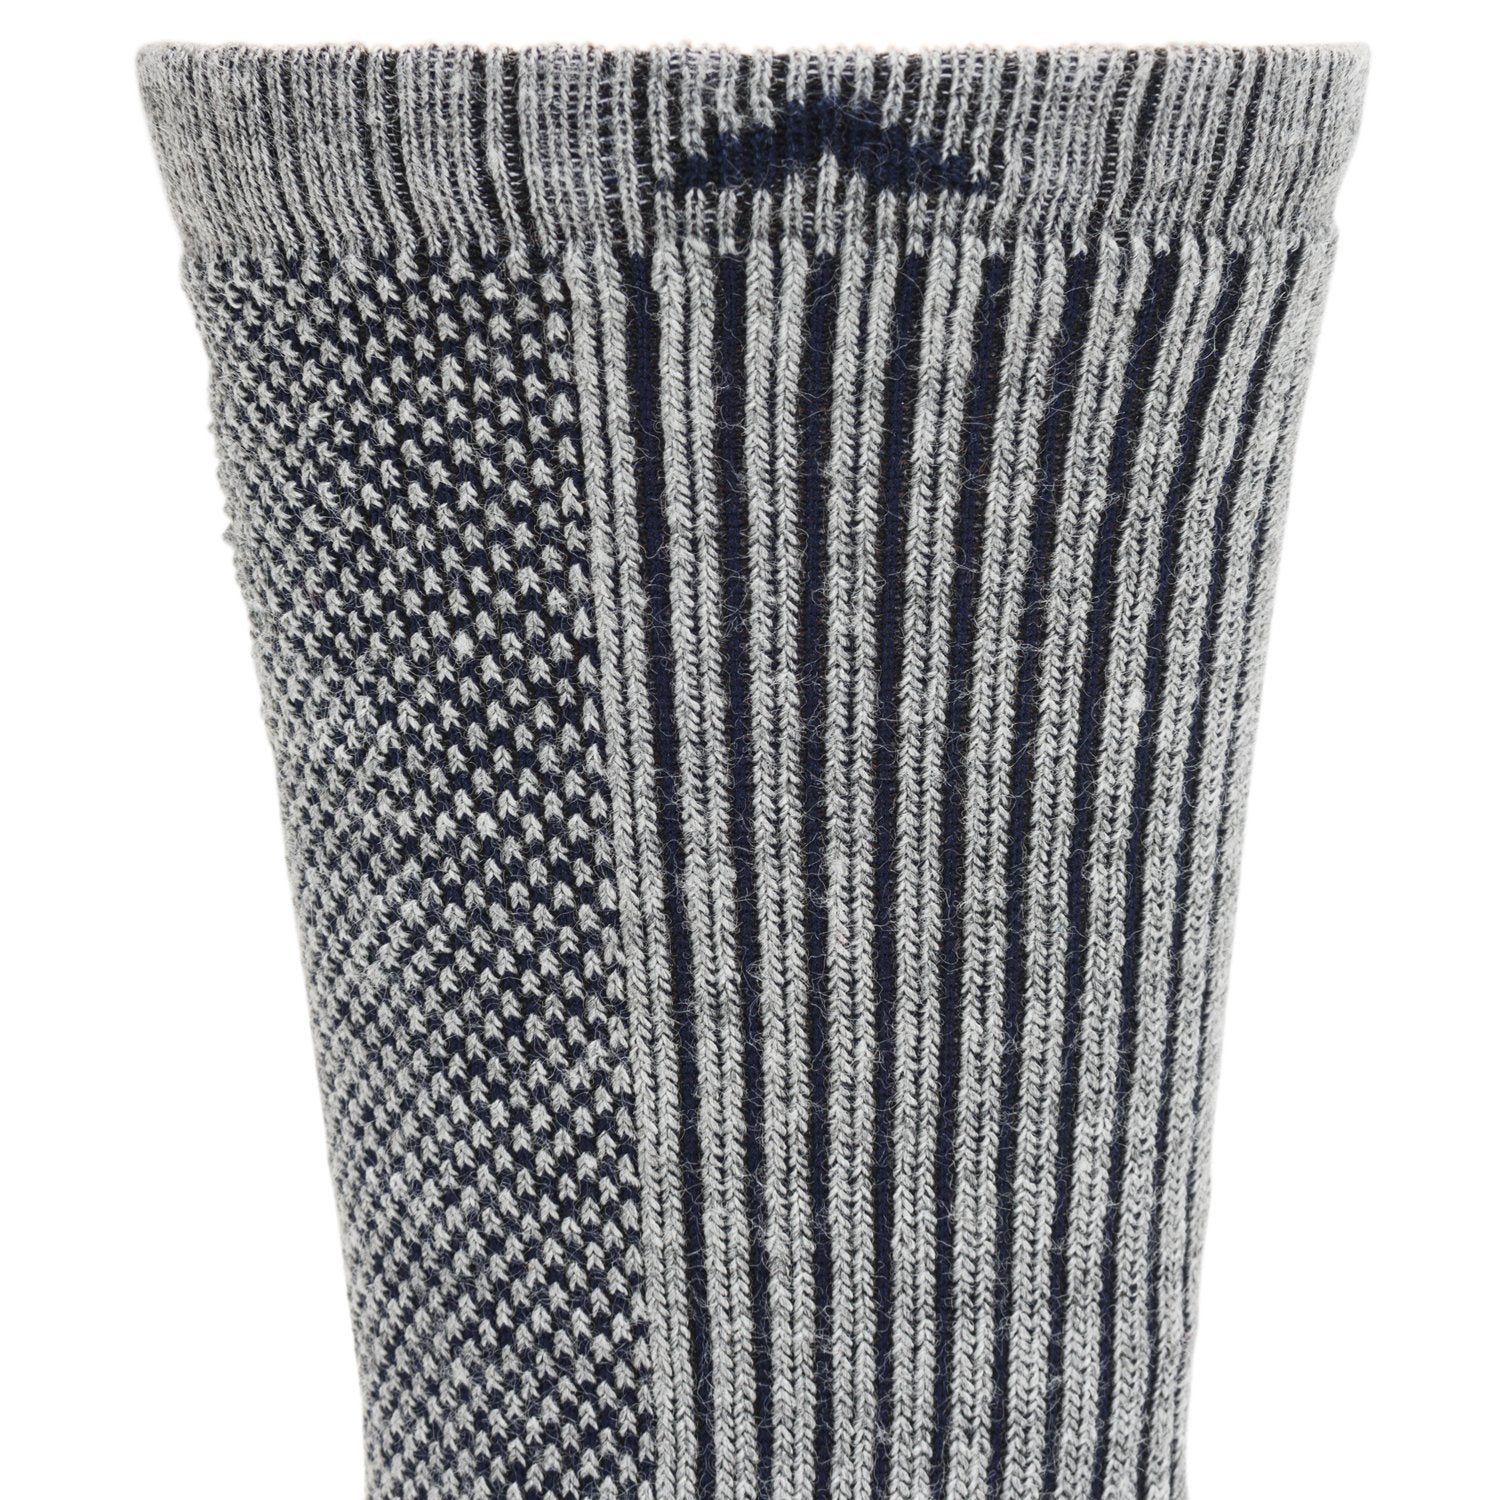 Cool-Lite Hiker Crew Midweight Sock - Grey/Navy cuff perspective - made in The USA Wigwam Socks